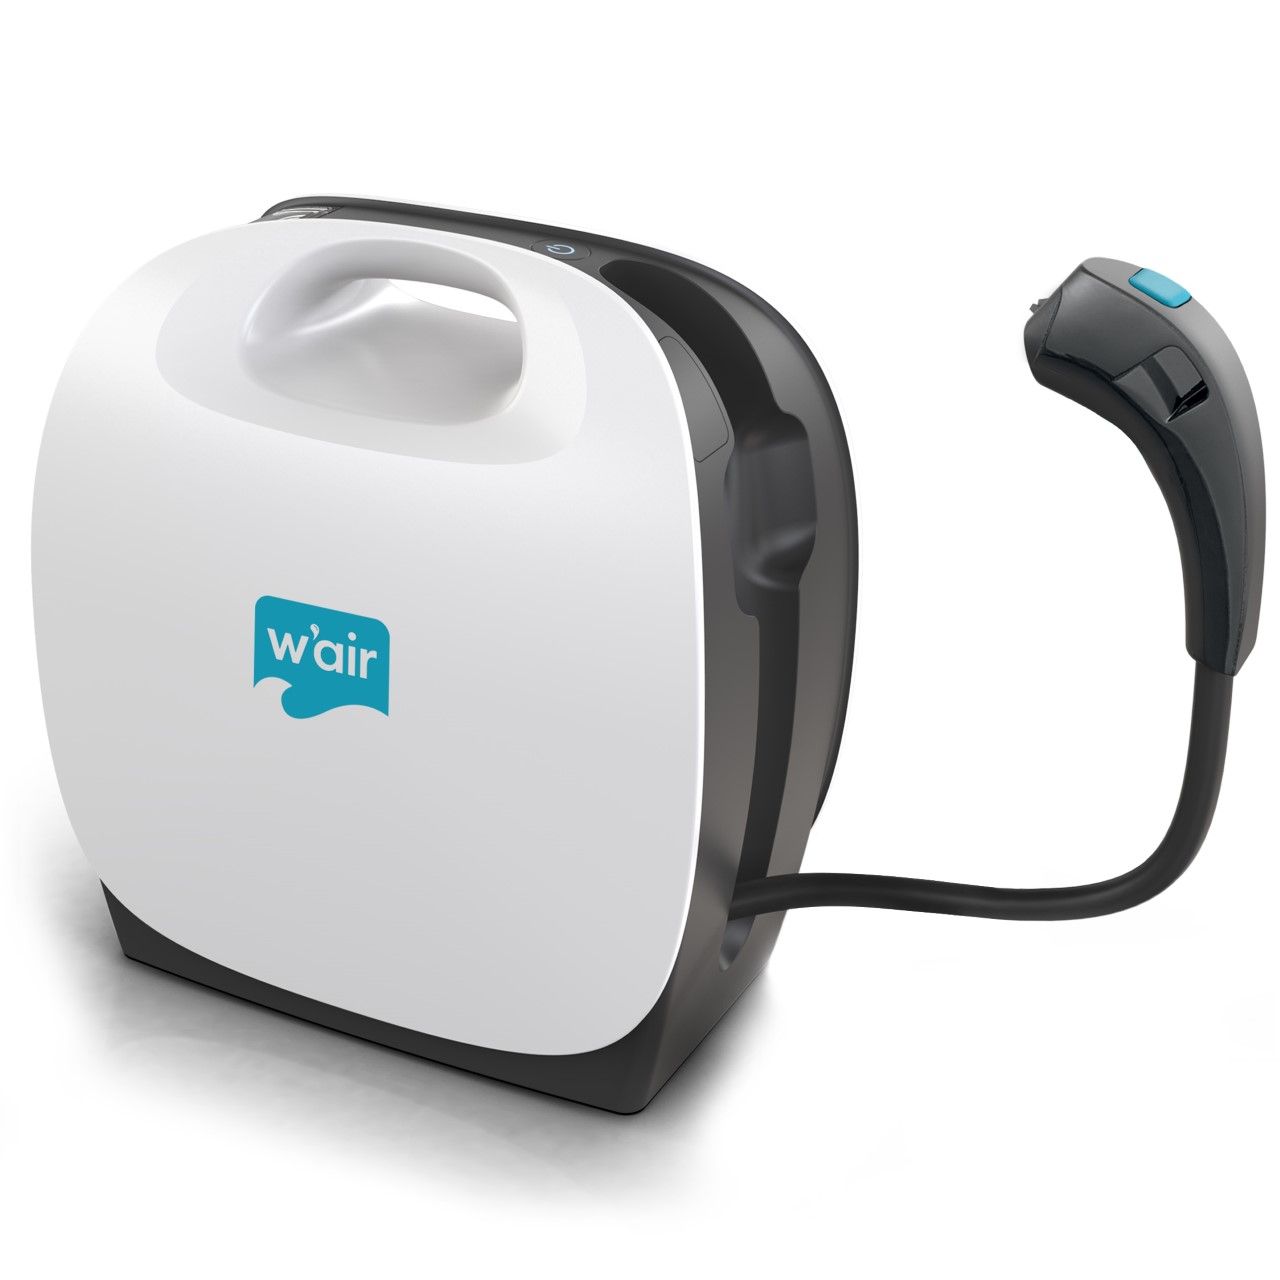 w'air sustainable fashion care device